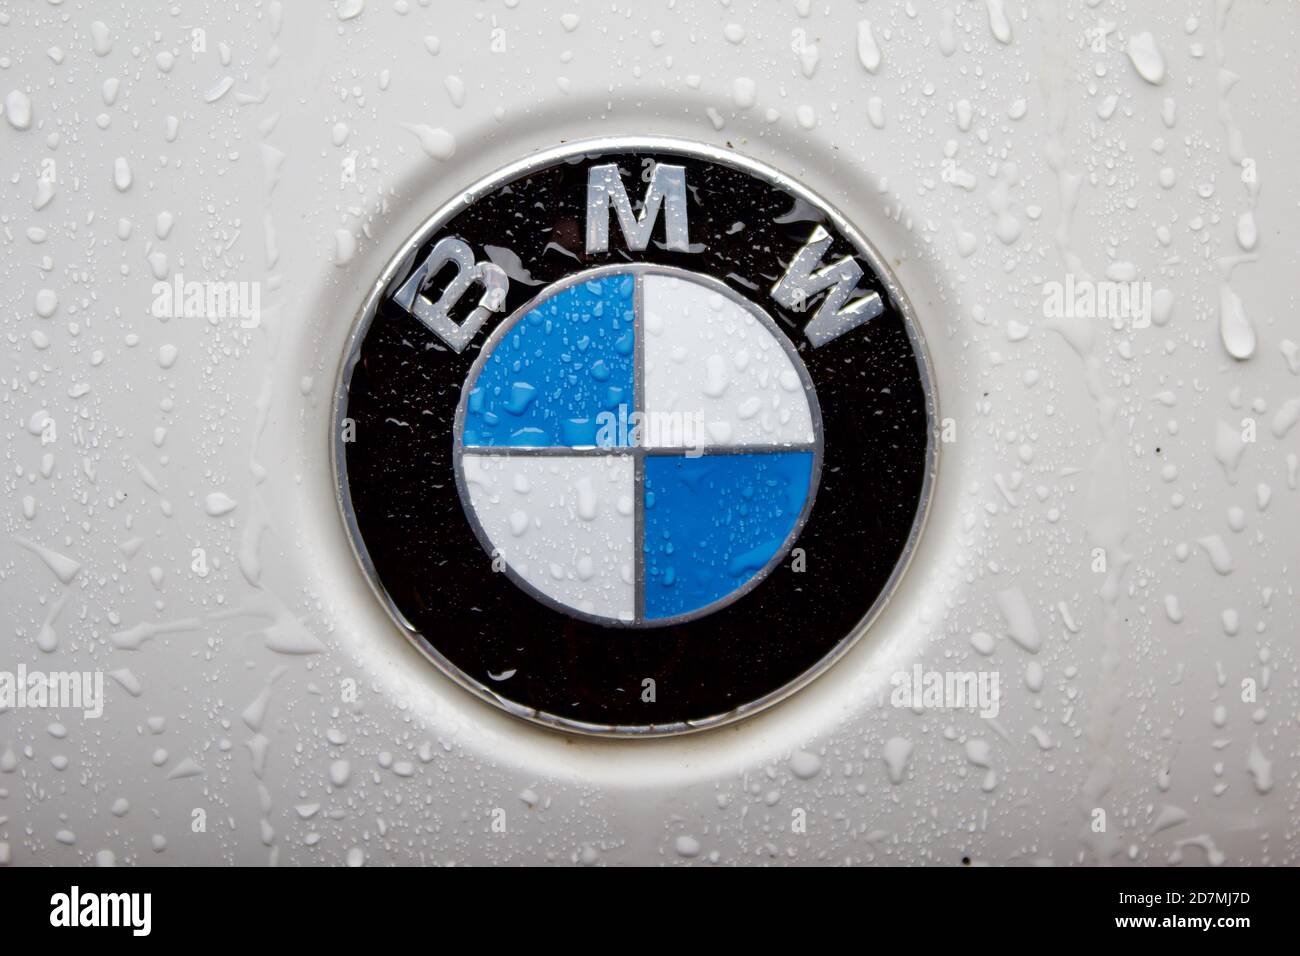 Complete BMW logo with rain drops on a white bonnet Stock Photo